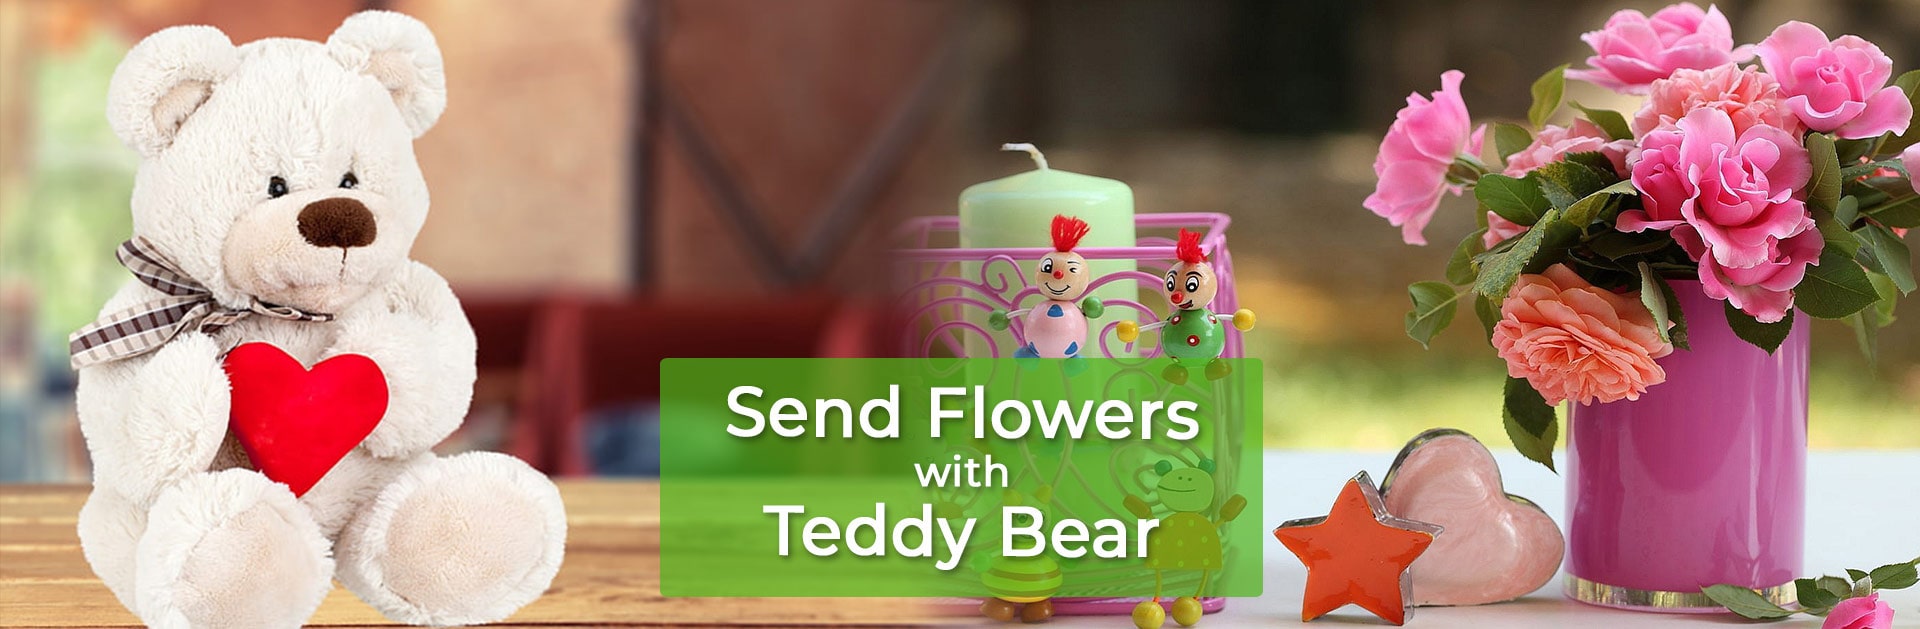 natural teddy and flowers Banner